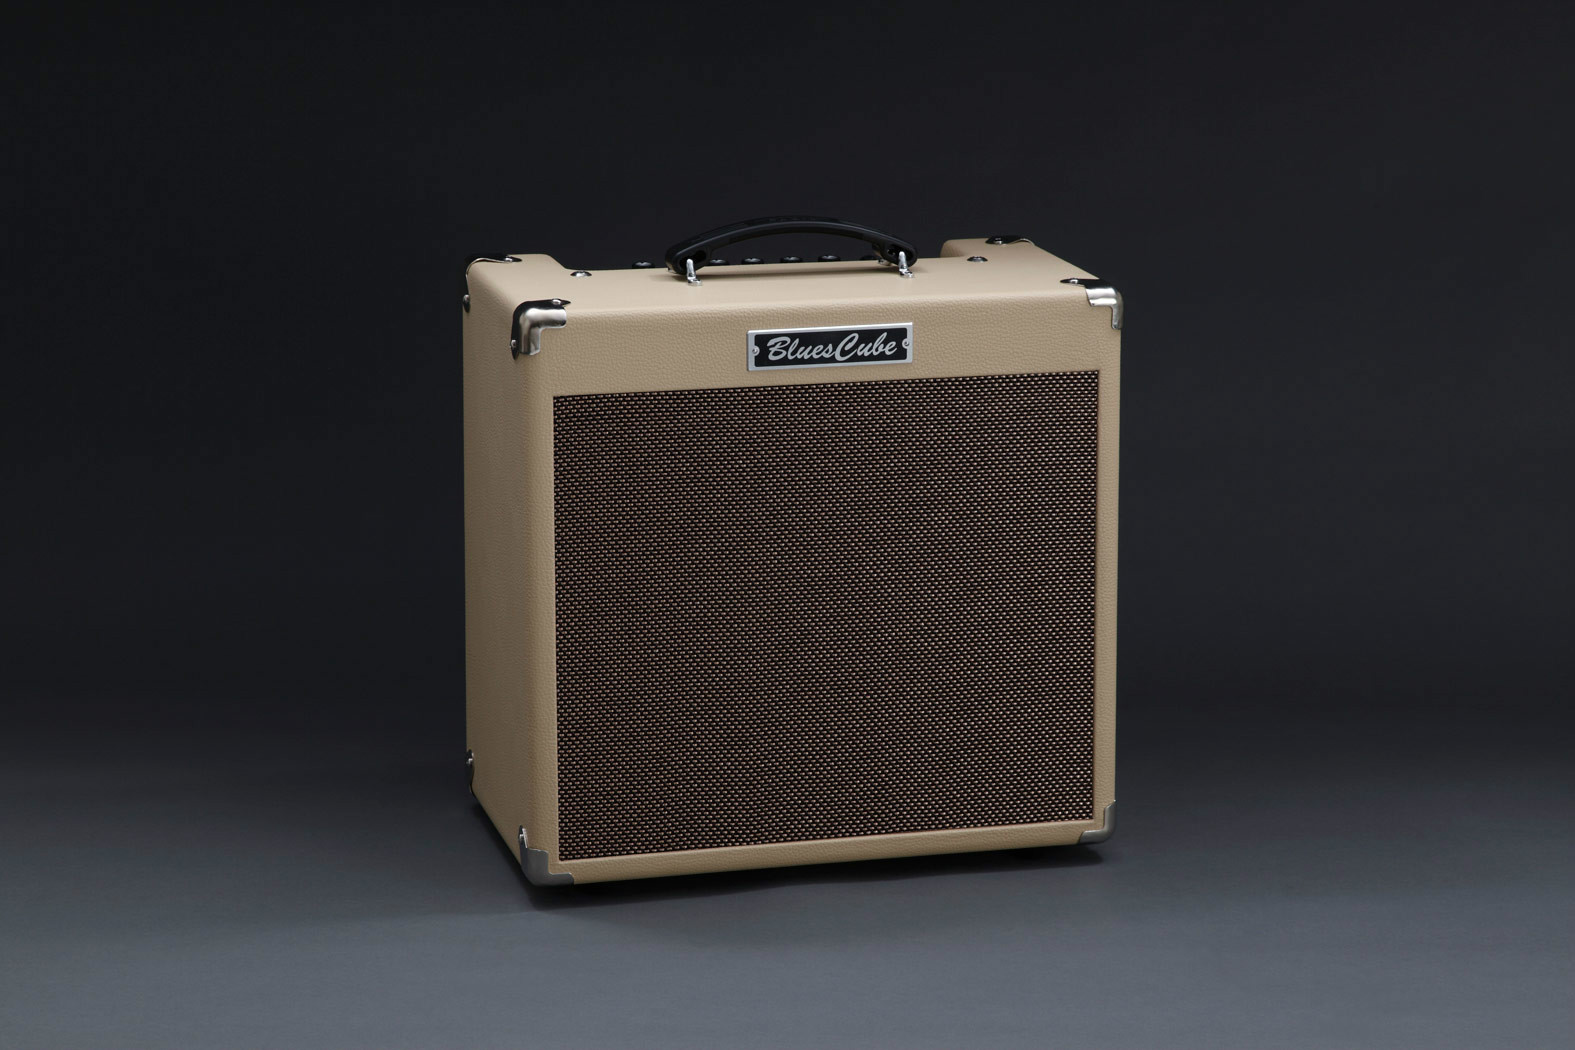 Roland Blues Cube Hot Guitar Amp In Vintage Blond: Canadian Online